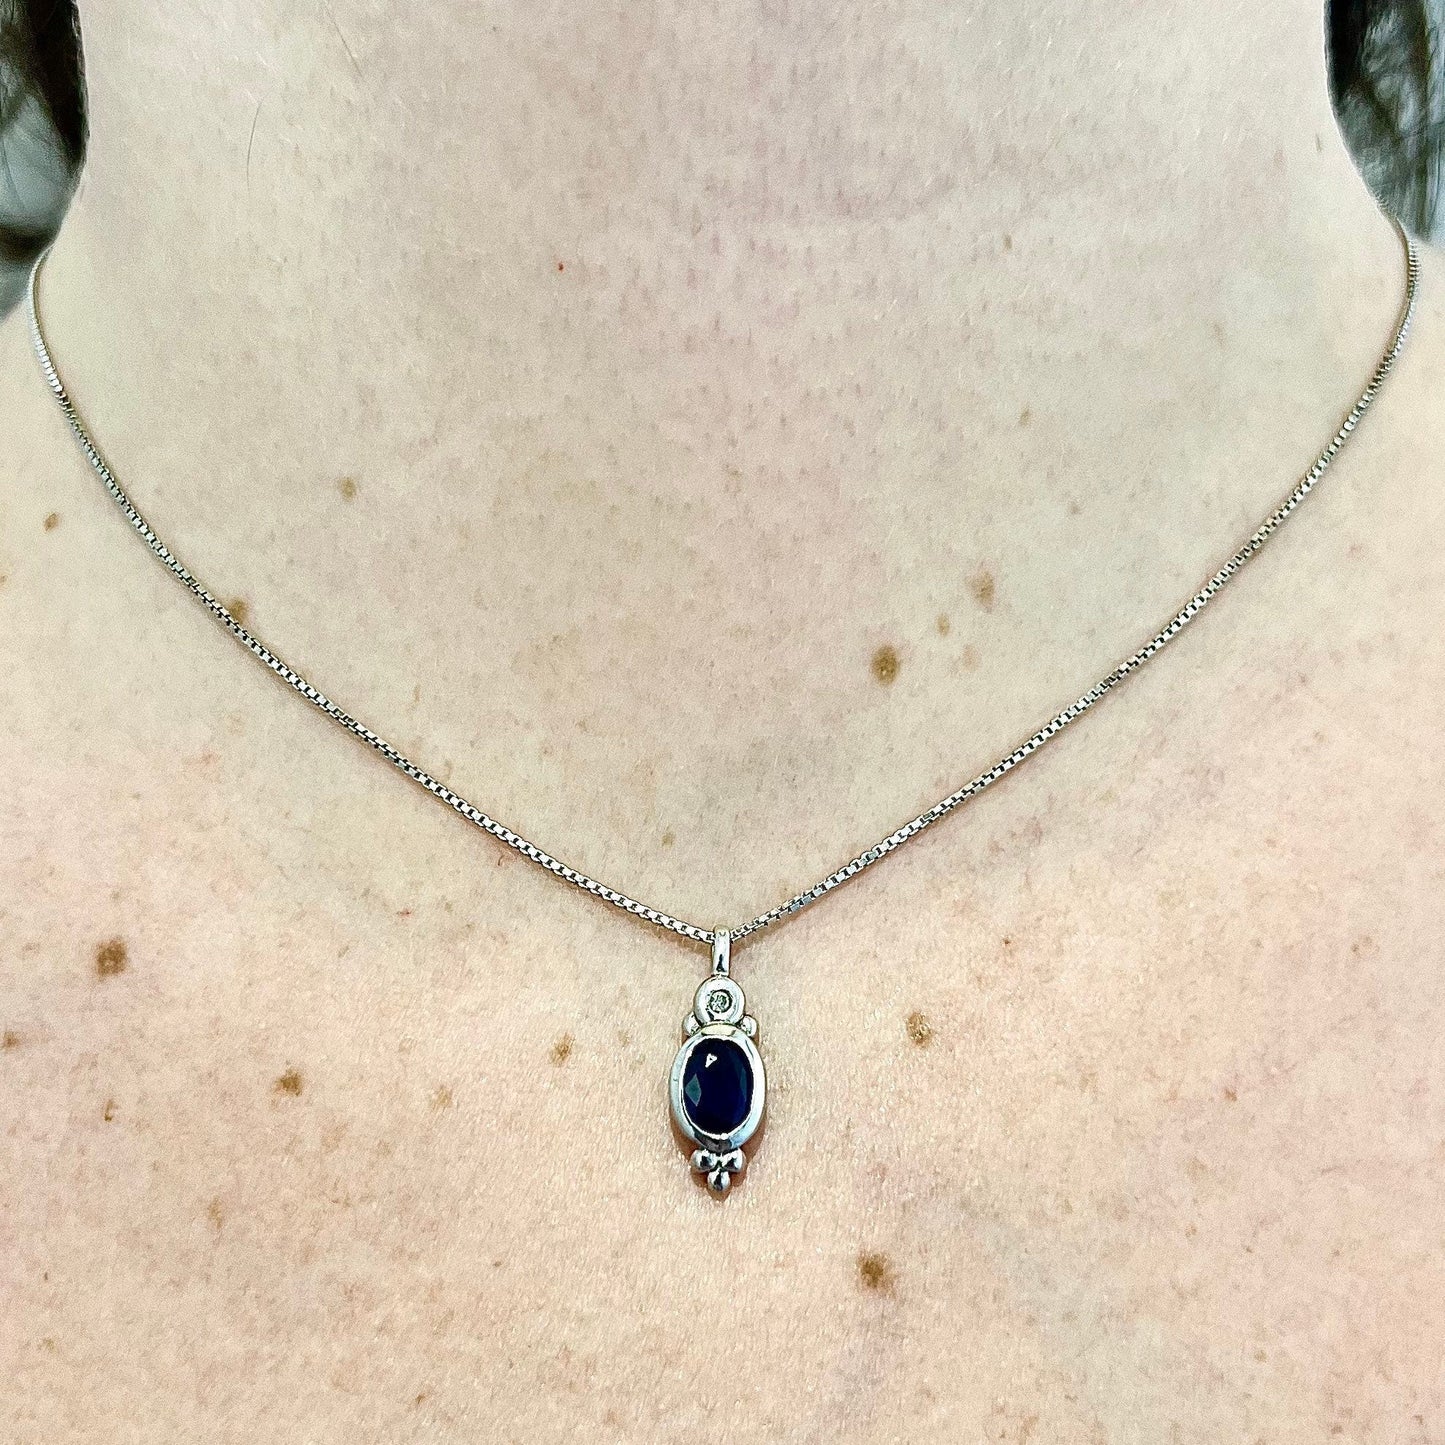 14K Blue Sapphire Pendant Necklace - White Gold Sapphire Necklace - September Birthstone - Vintage Sapphire Solitaire - Best Gifts For Her